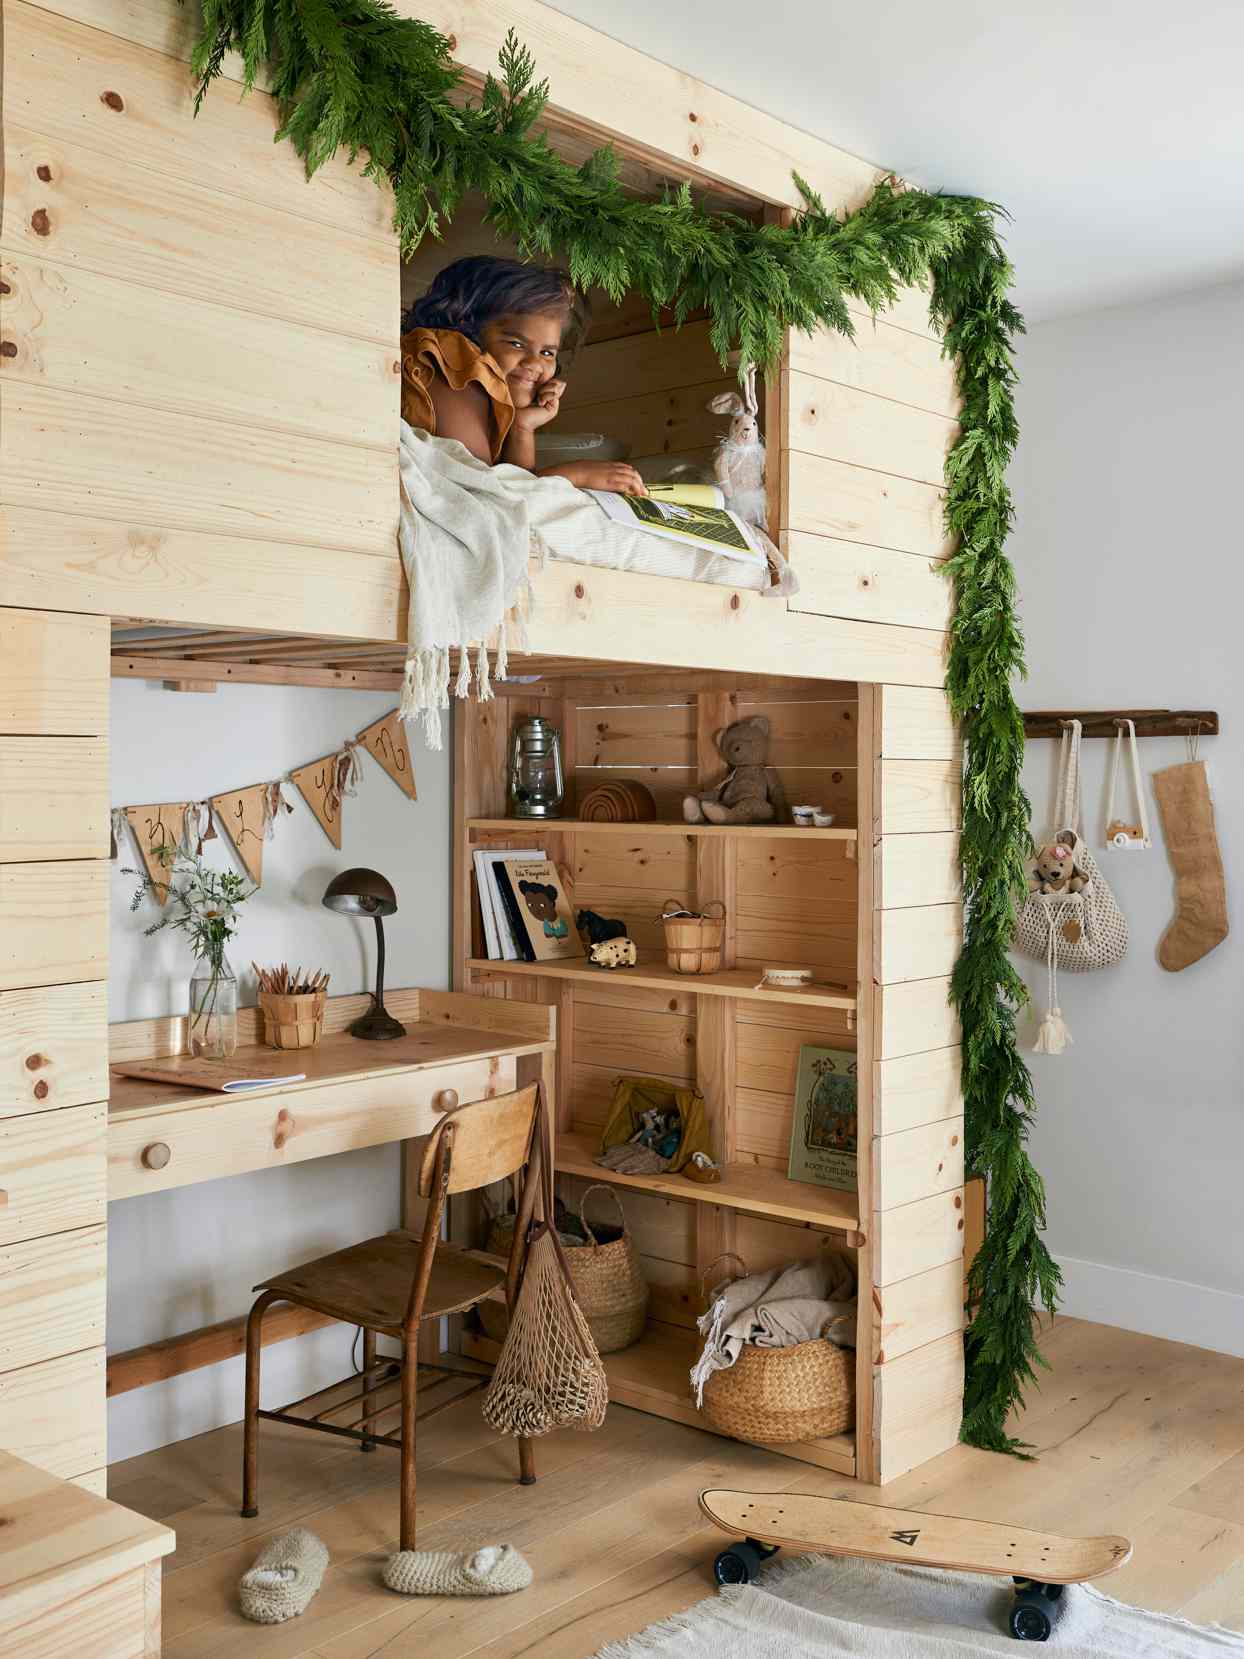 kid in wooden bunk bed with greenery garland